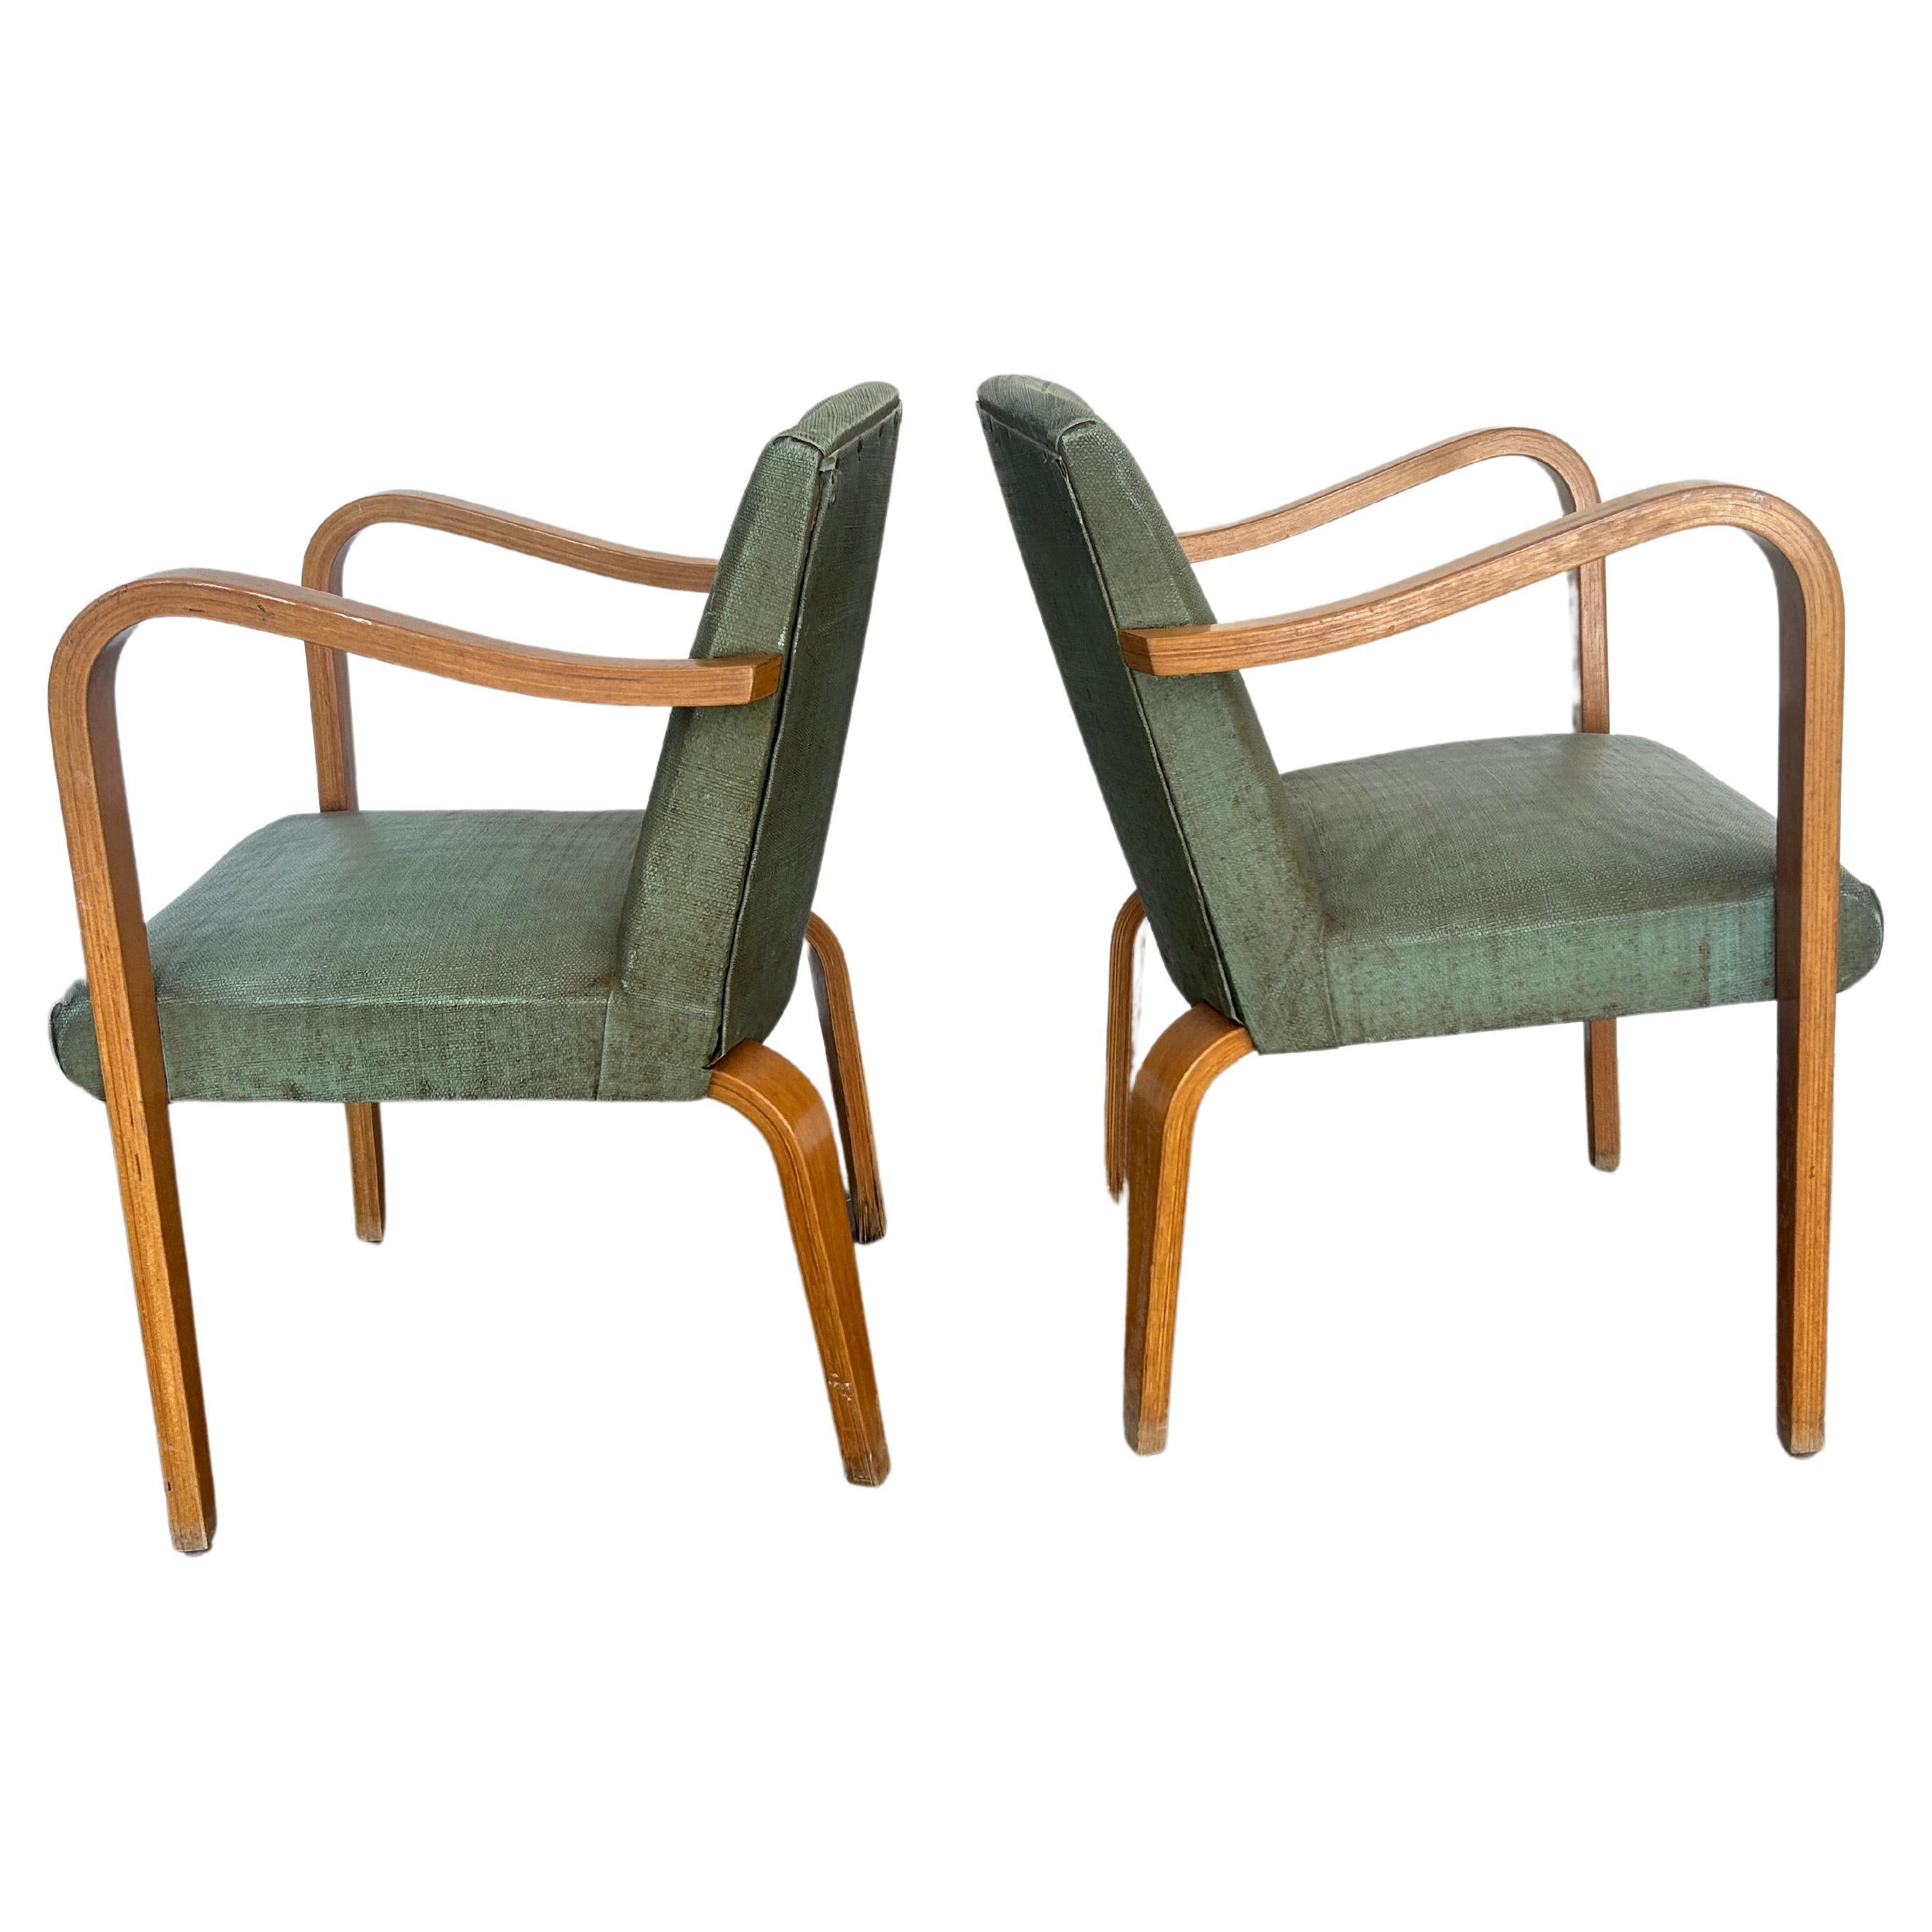 Pair of Mid-Century Modern Thonet Bentwood Birch Arm Chairs For Sale